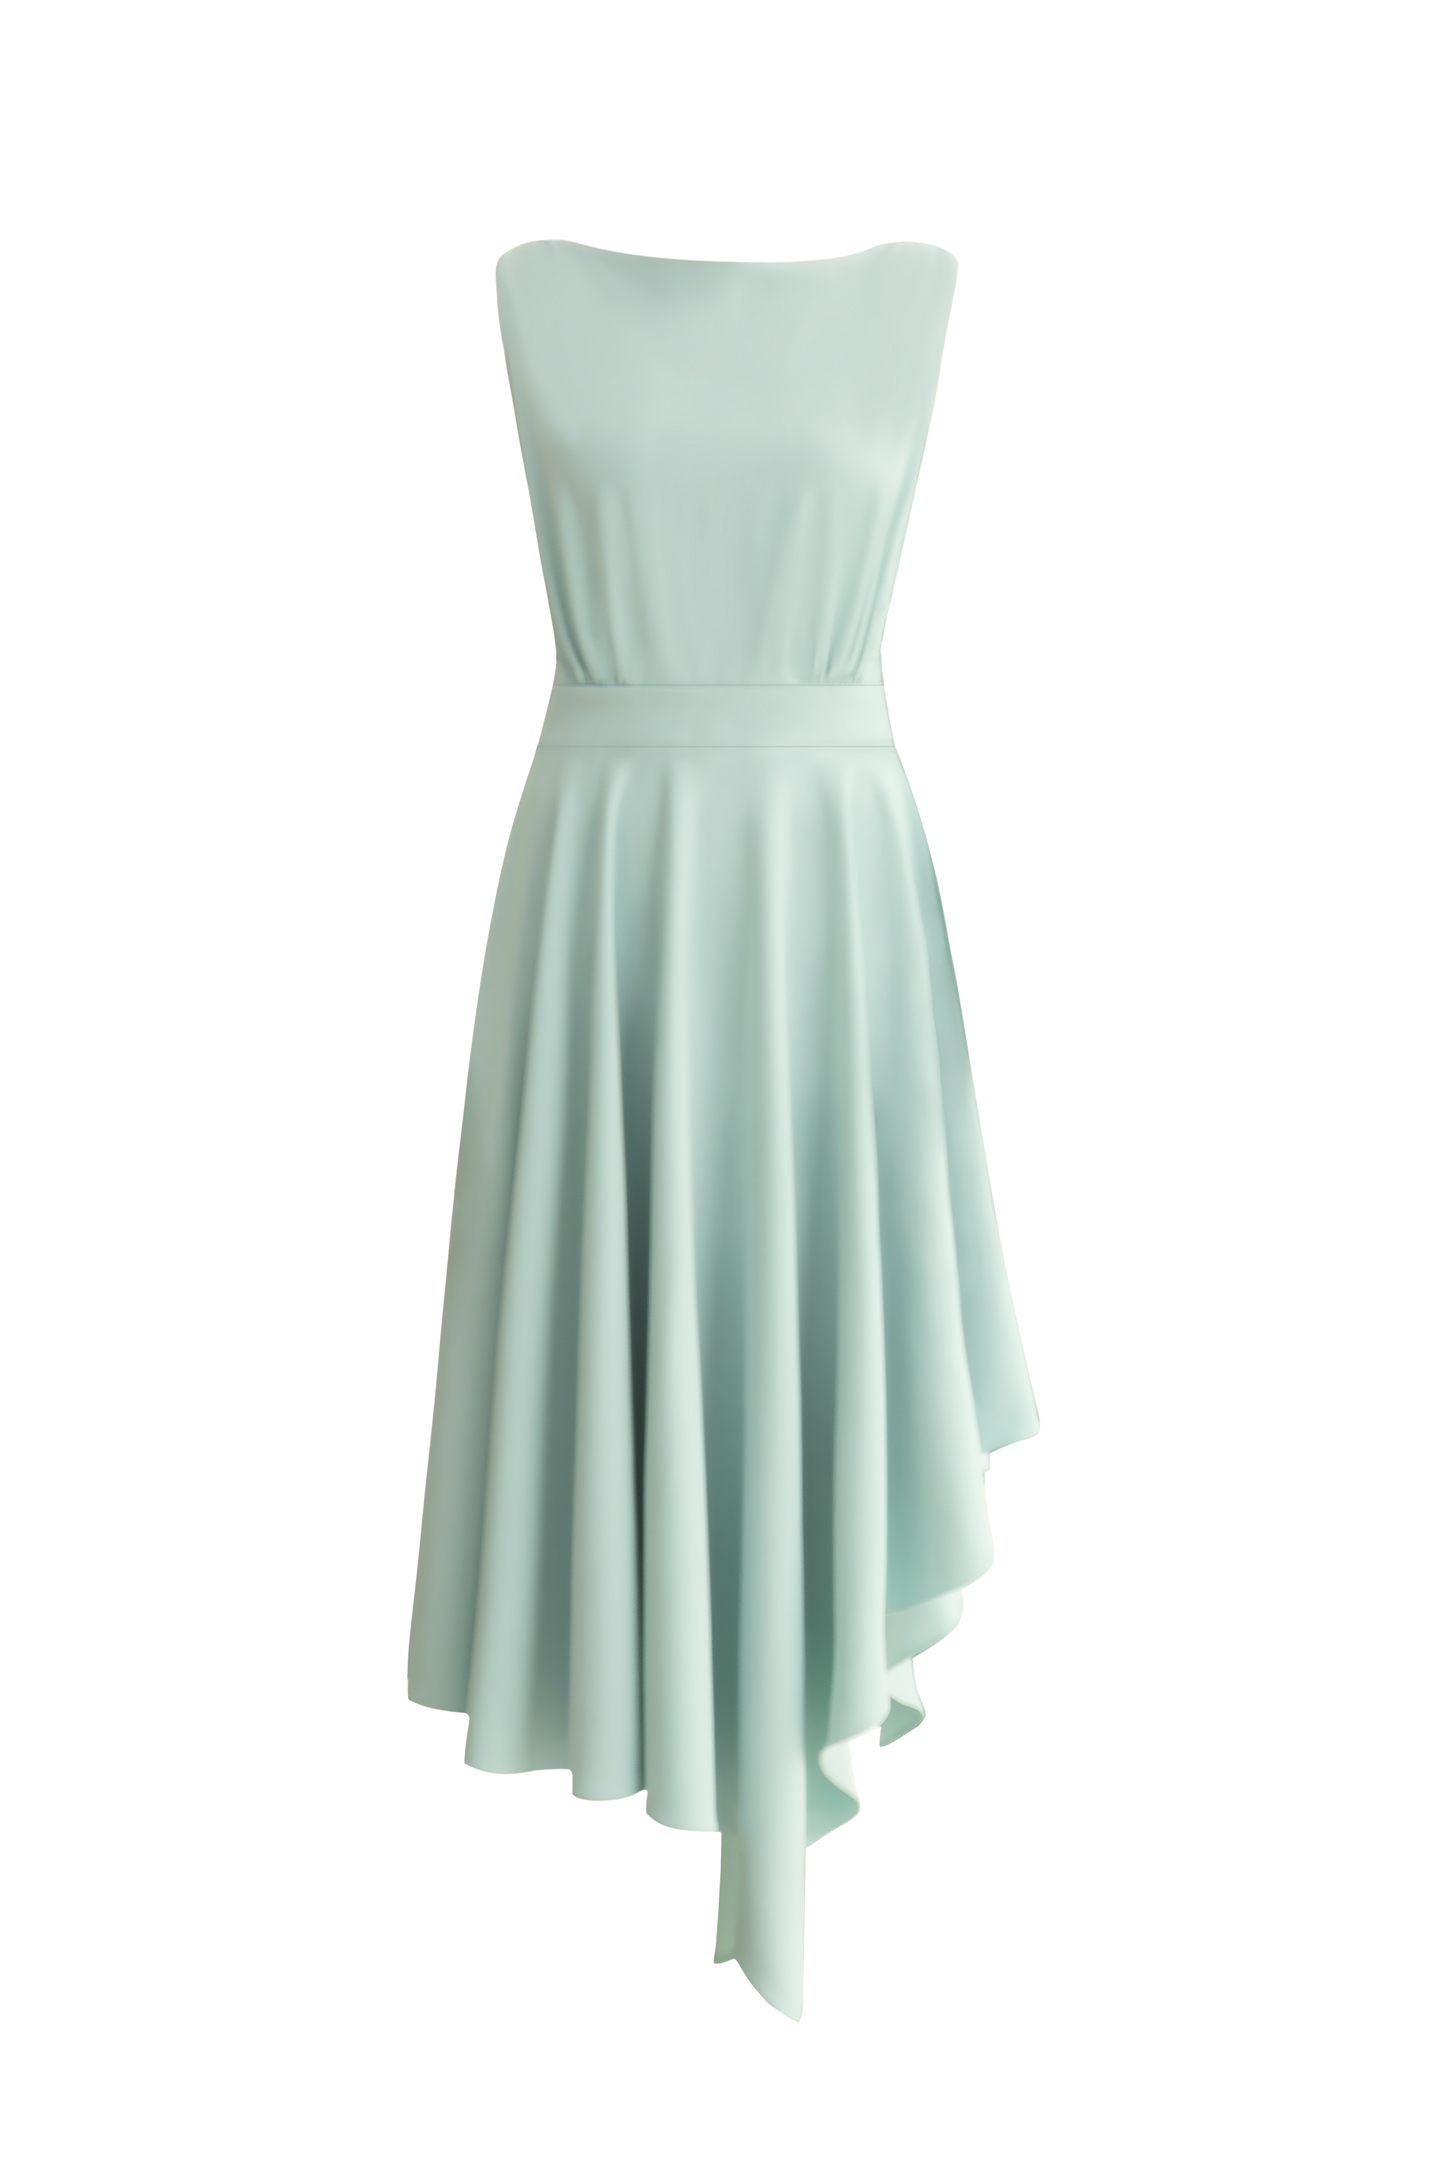 The Morgan Dress in Mint Green - Atelier Patty Ang